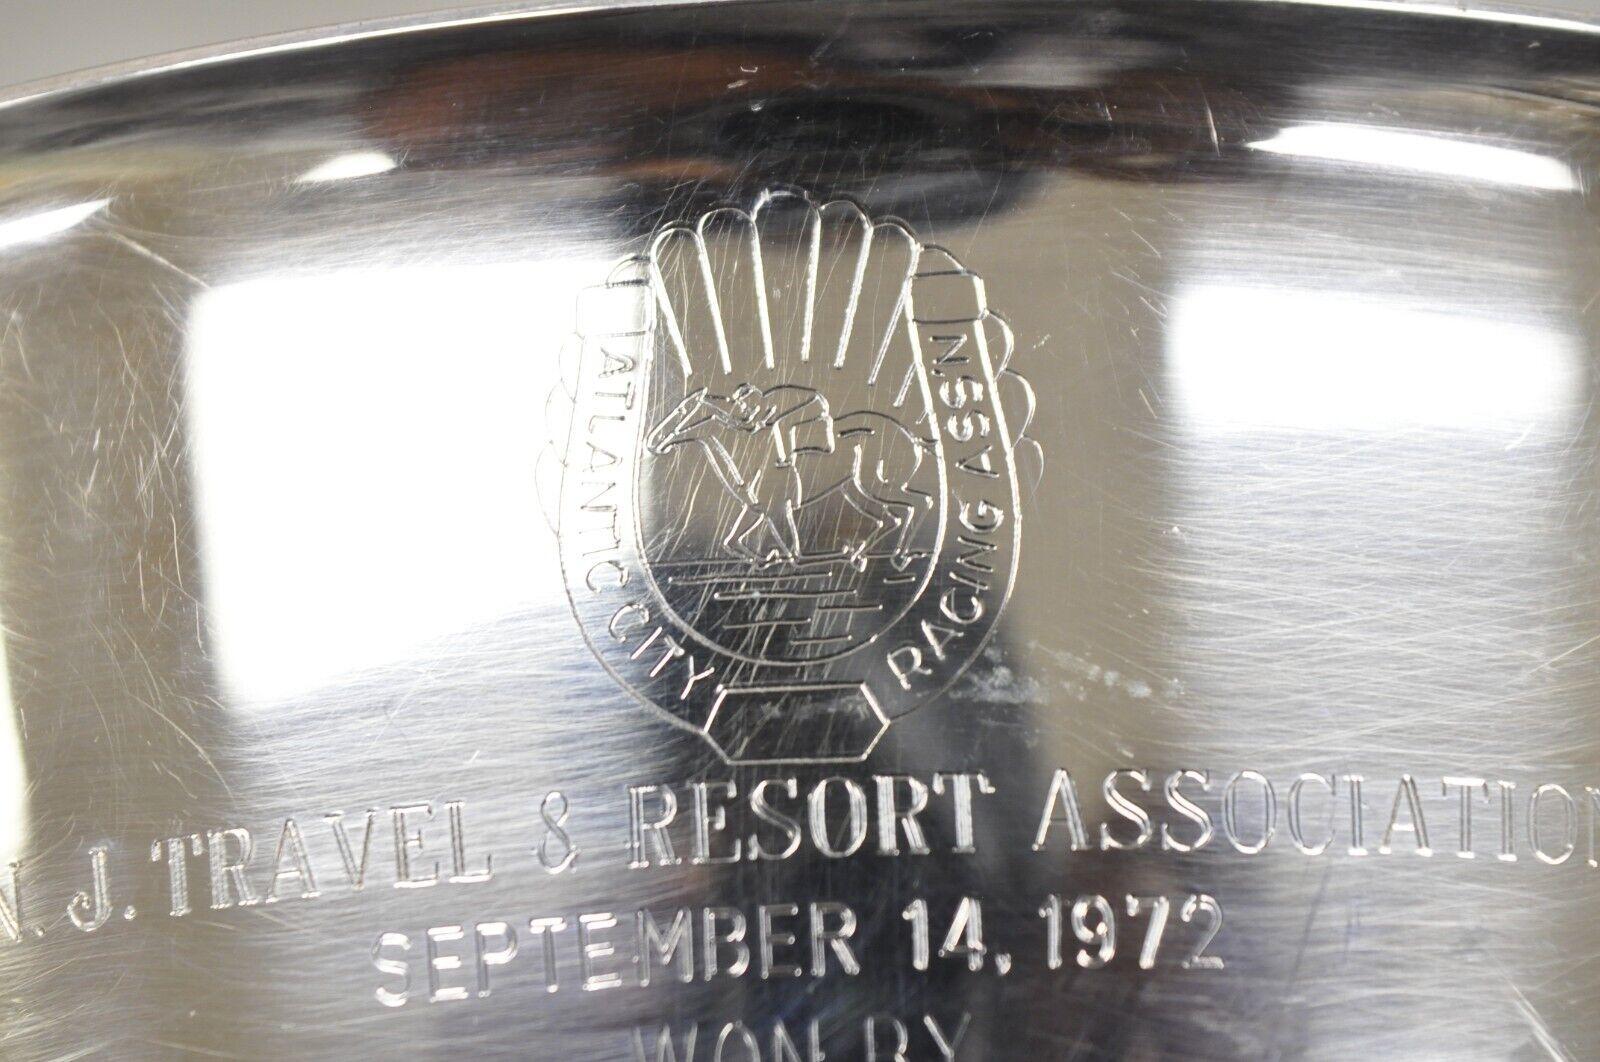 Vintage Gorham EP YC781 Silver Plated Atlantic City Racing Trophy Award Bowl. Item featured is engraved 